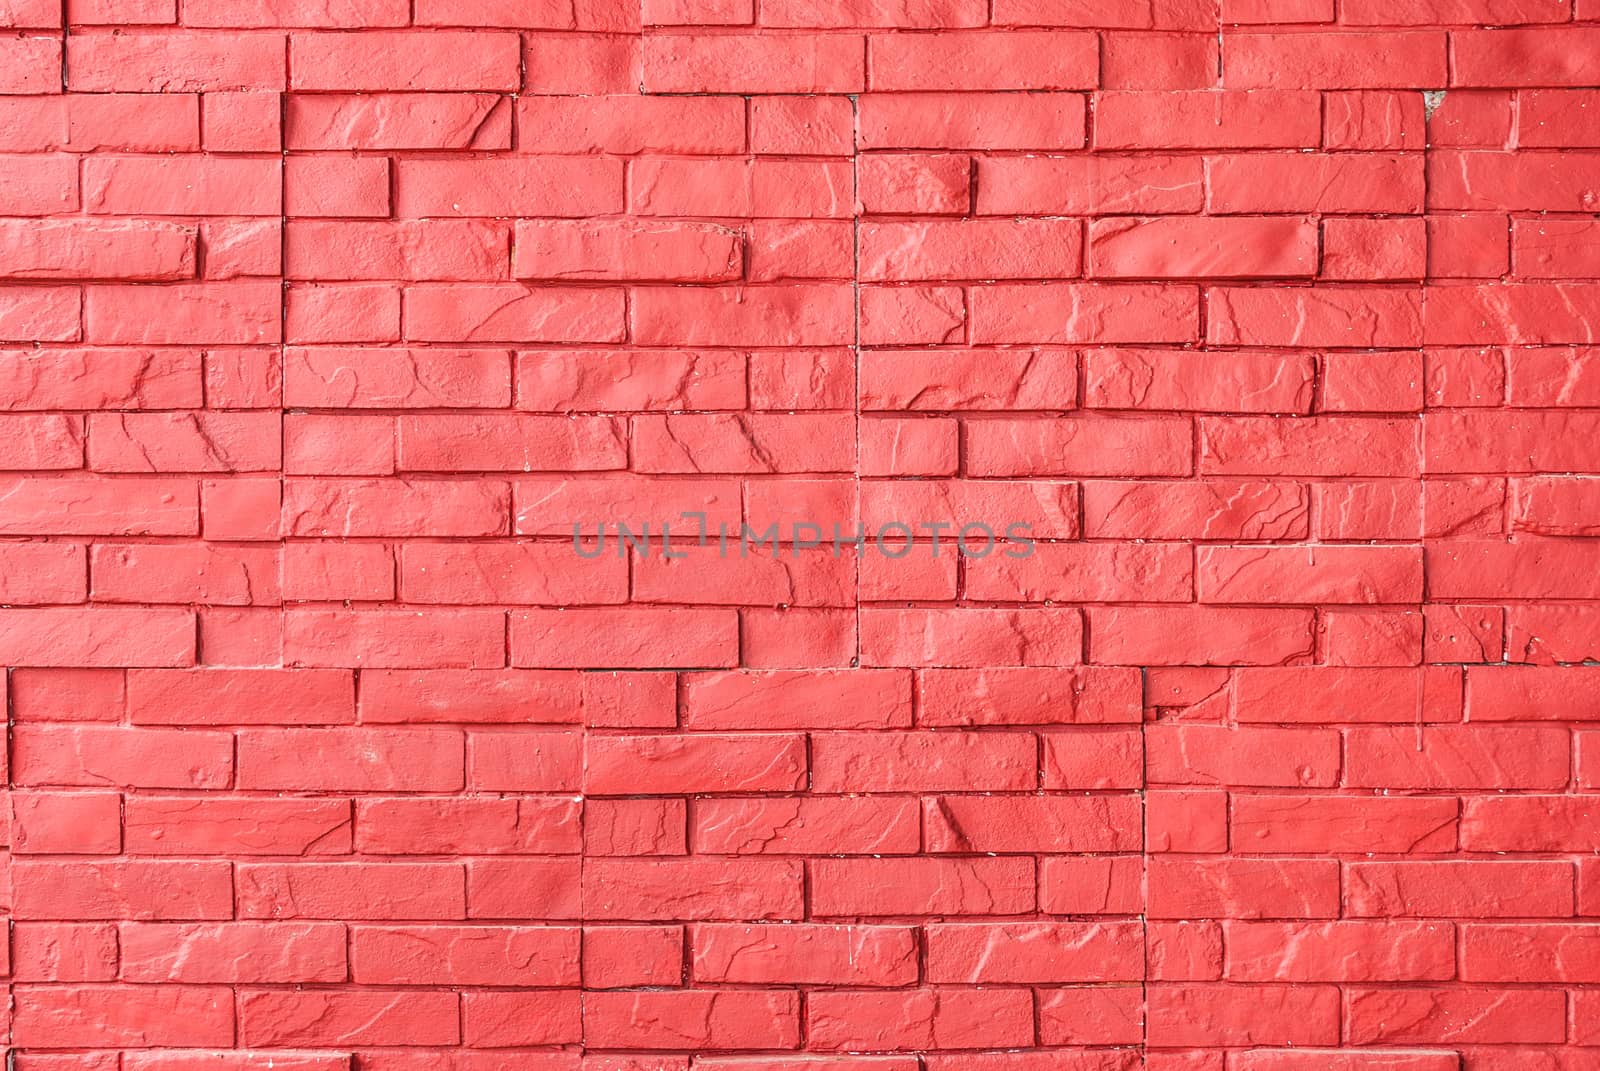 Red Rough Brick Wall Background/ Texture.